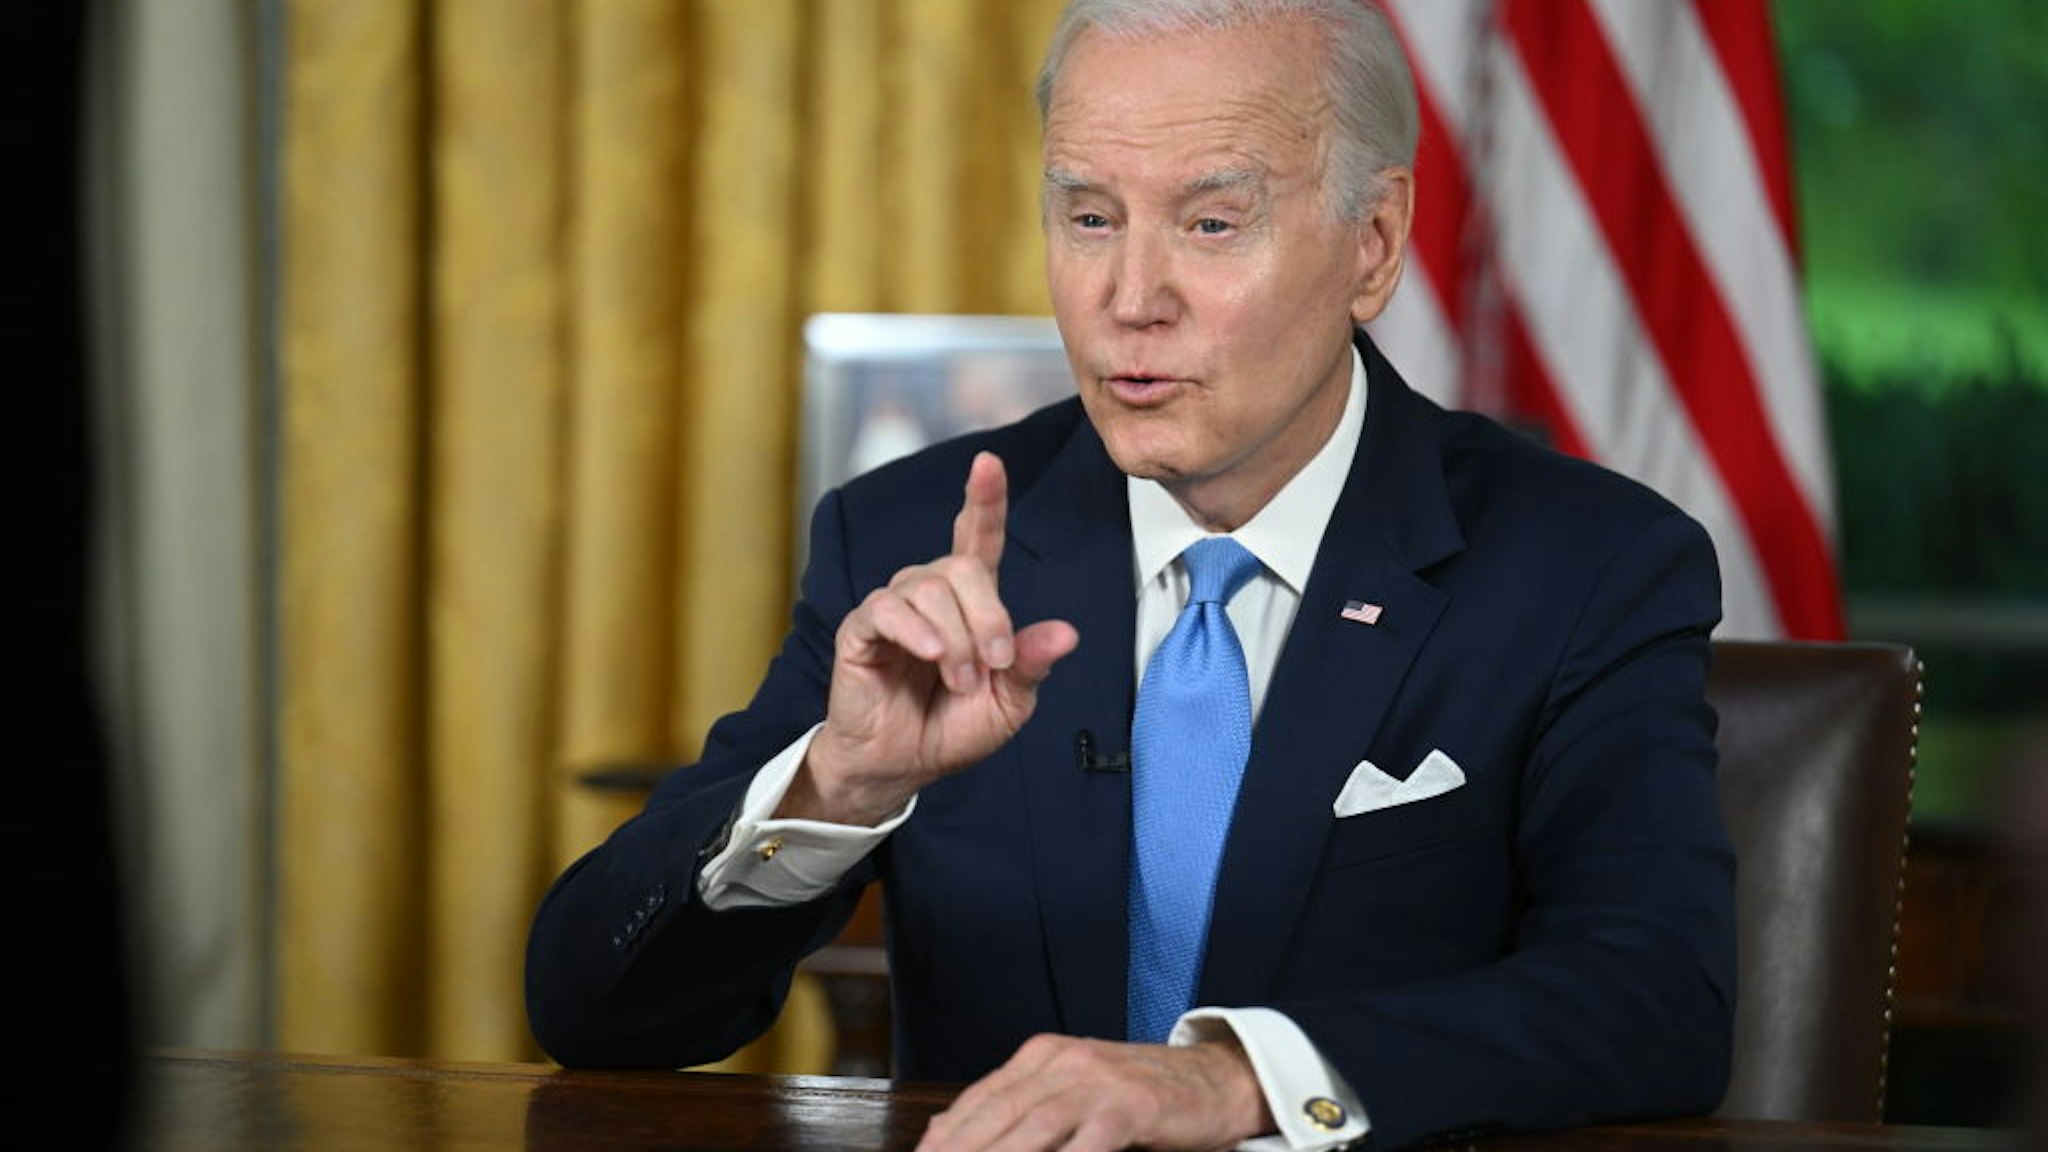 WASHINGTON, DC - JUNE 02: President Joe Biden addresses the nation on averting default and the Bipartisan Budget Agreement in the Oval Office of the White House on June 2, 2023 in Washington, DC.